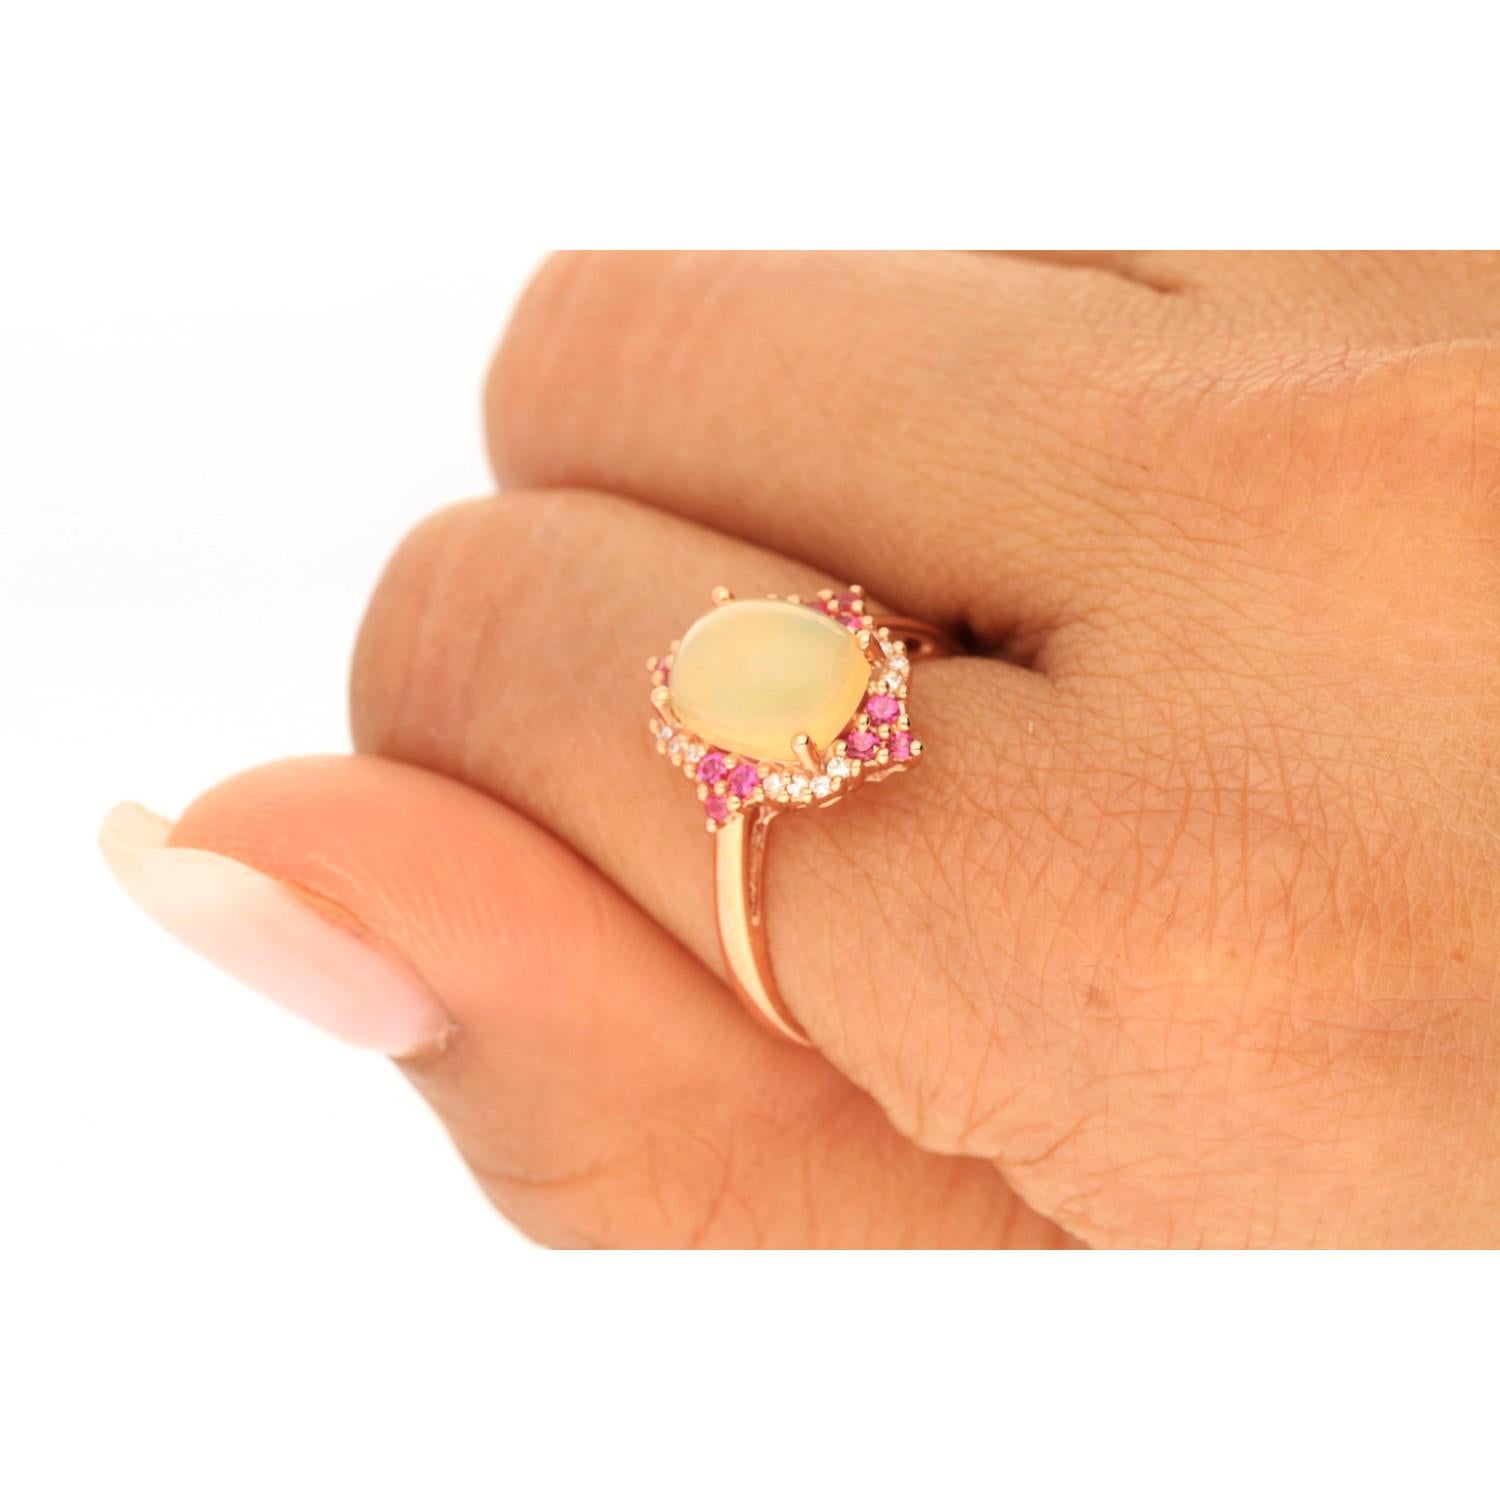 This beautiful Natural Opal Ring is crafted in 10-karat Yellow gold and features a 1.41 carat 1 Pc Natural Ethiopian Opal, 12 Pcs Round Cut Hot Pink Ruby with 0.24 Carats and 16 Pcs Round White Diamonds in GH- I1 quality with 0.06 Ct in a